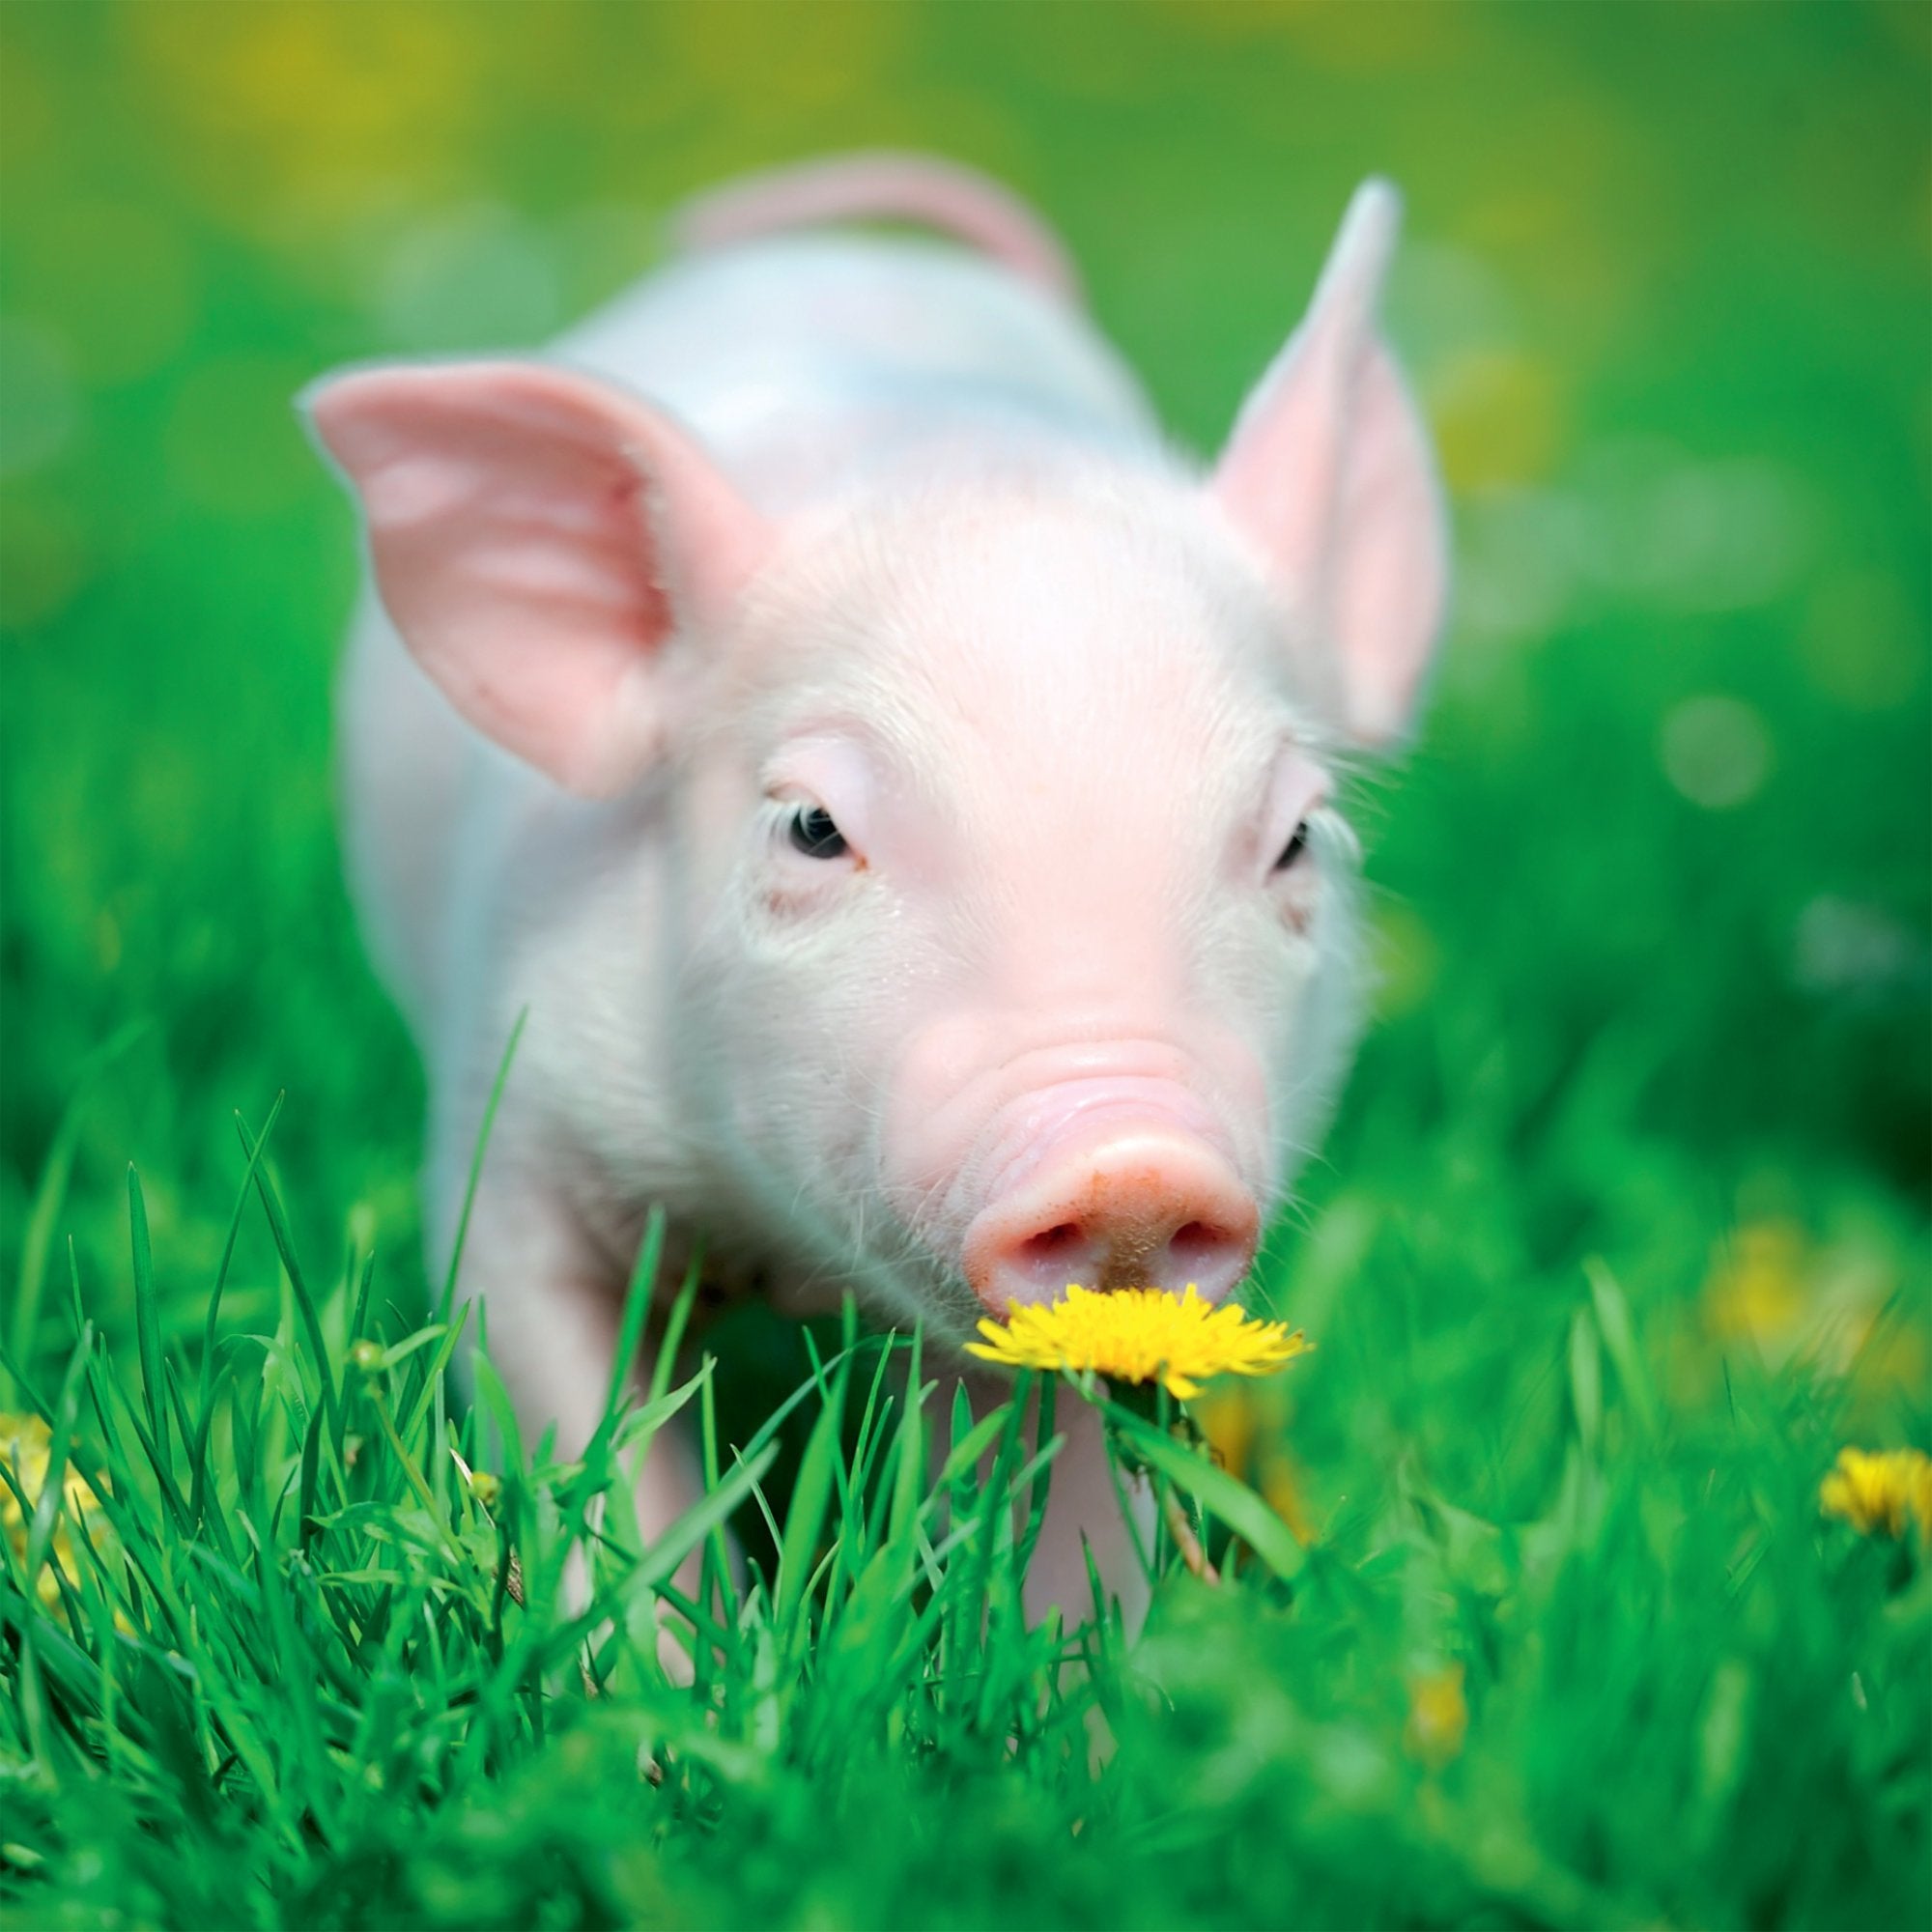 Photograph of Open Piglet in Grass Greetings Card at Nicole's Shop